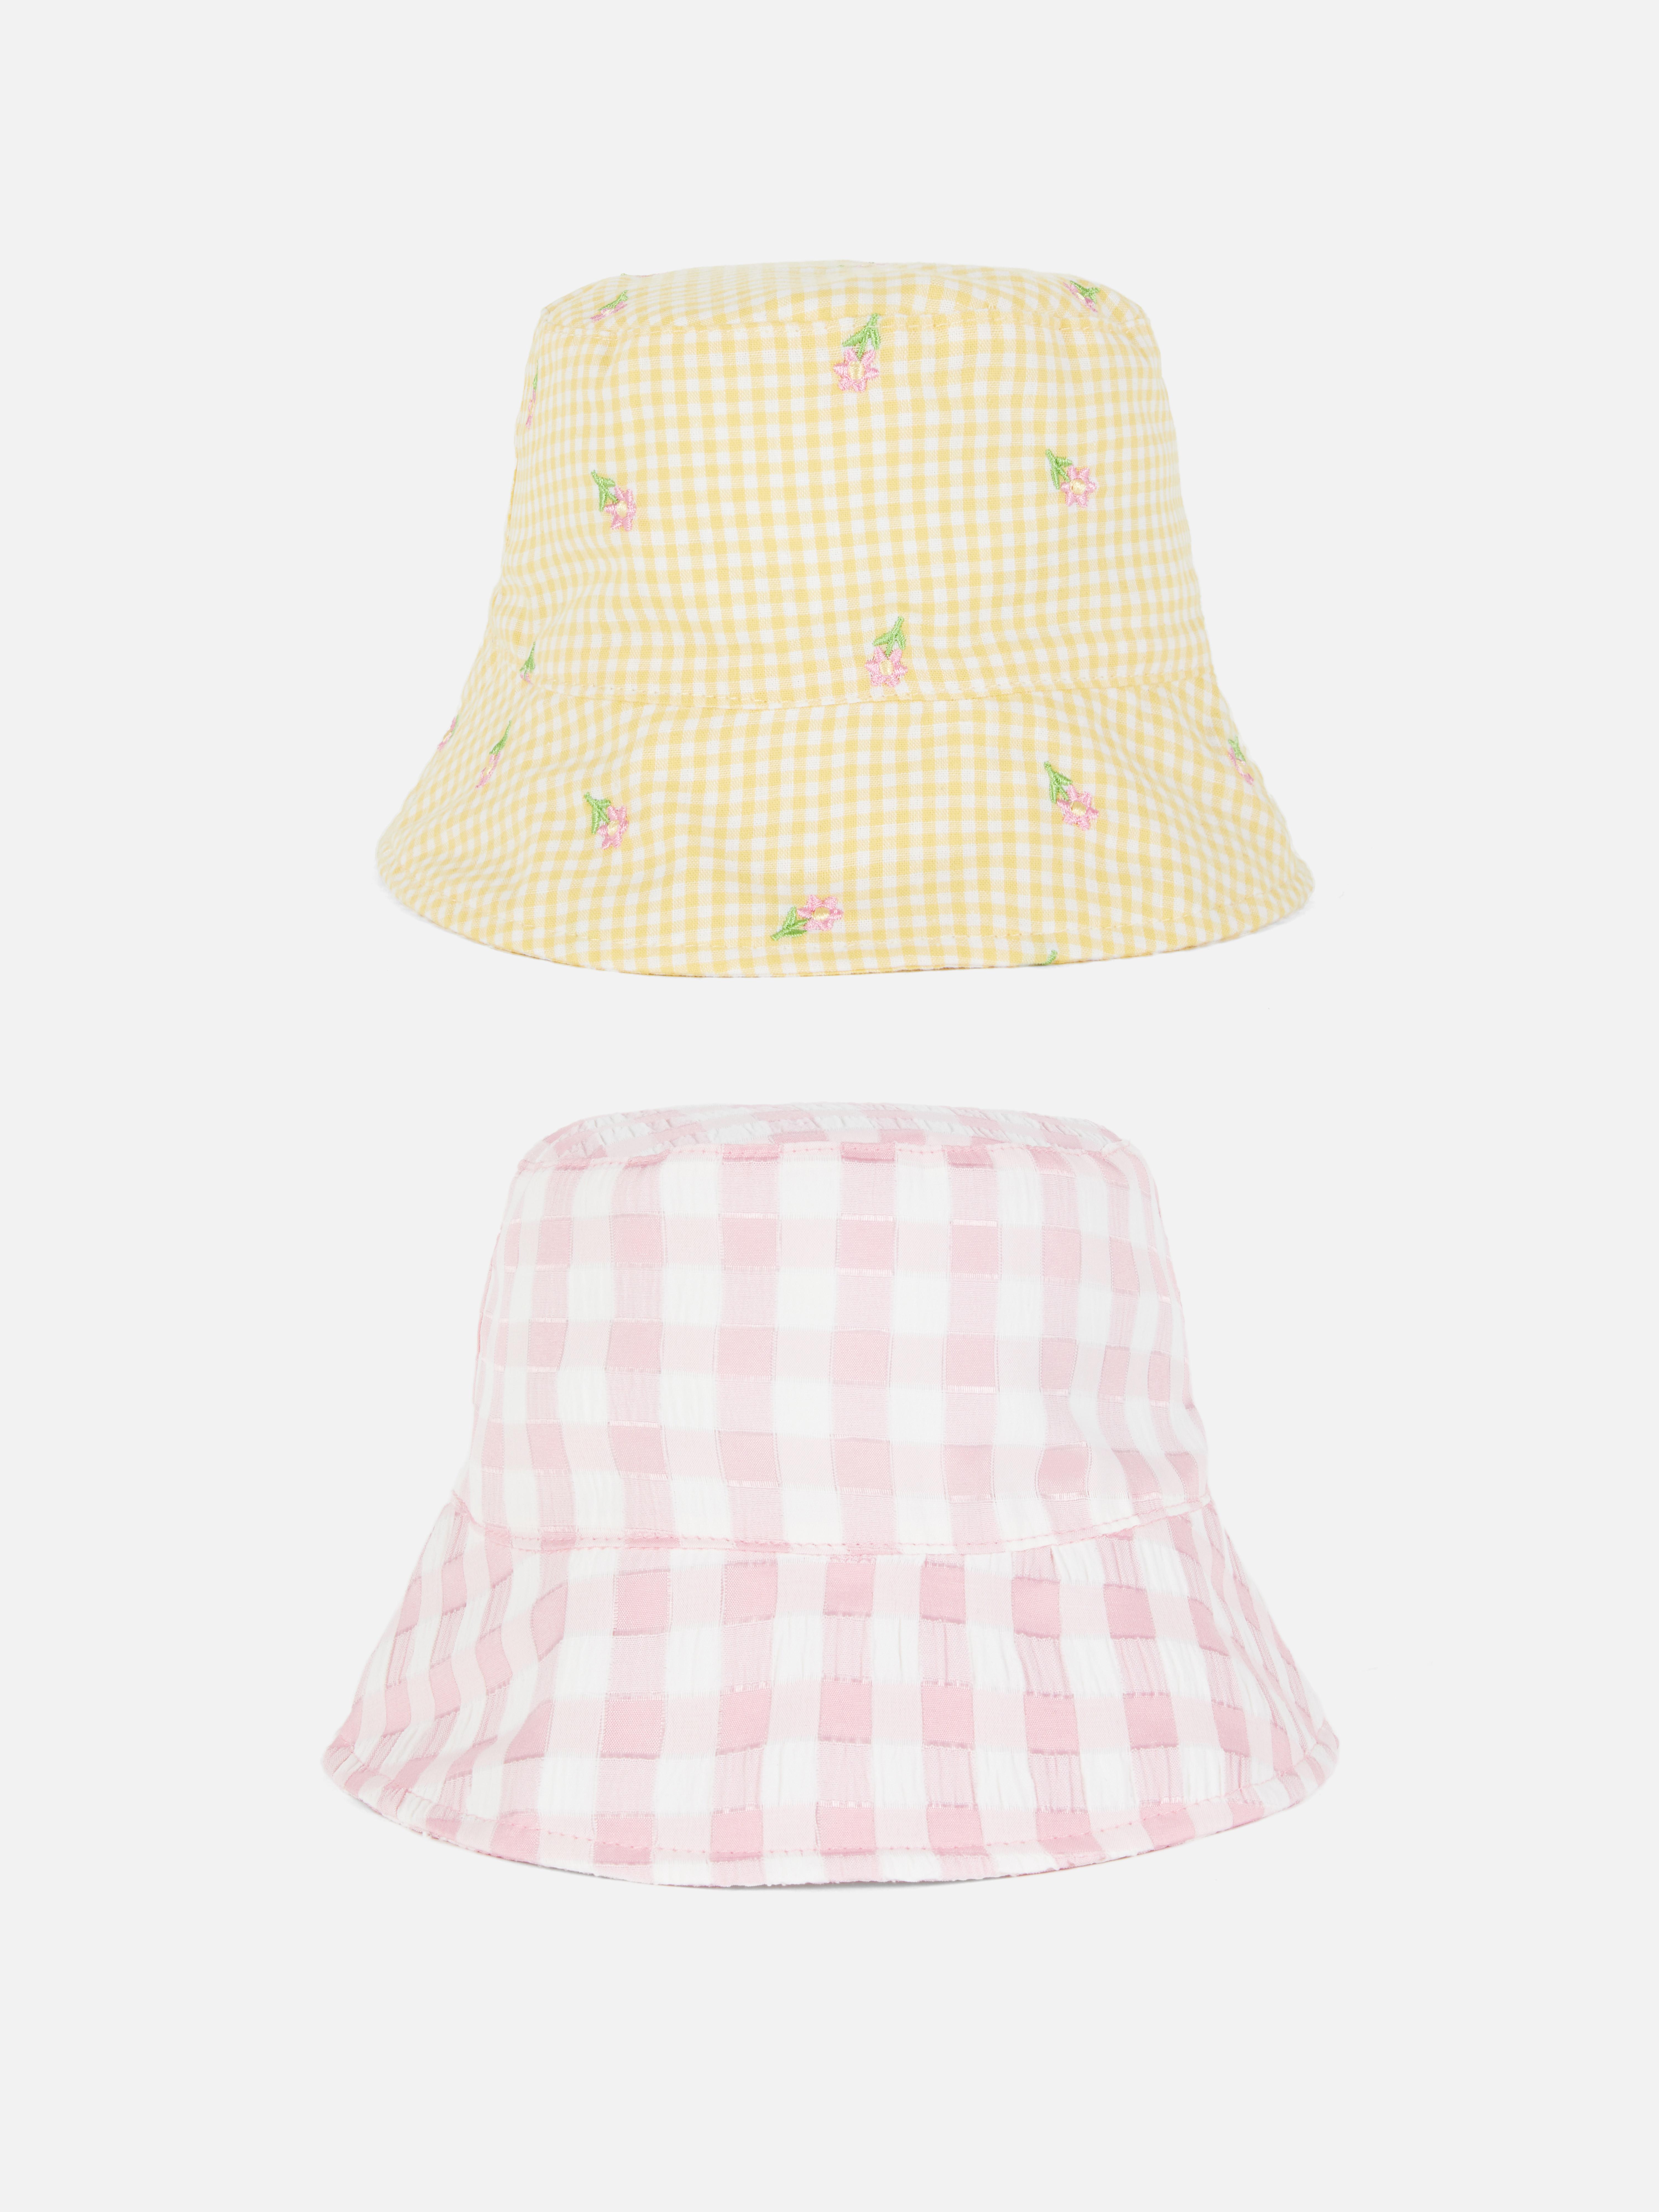 2-Pack Embroidered Bucket Hats